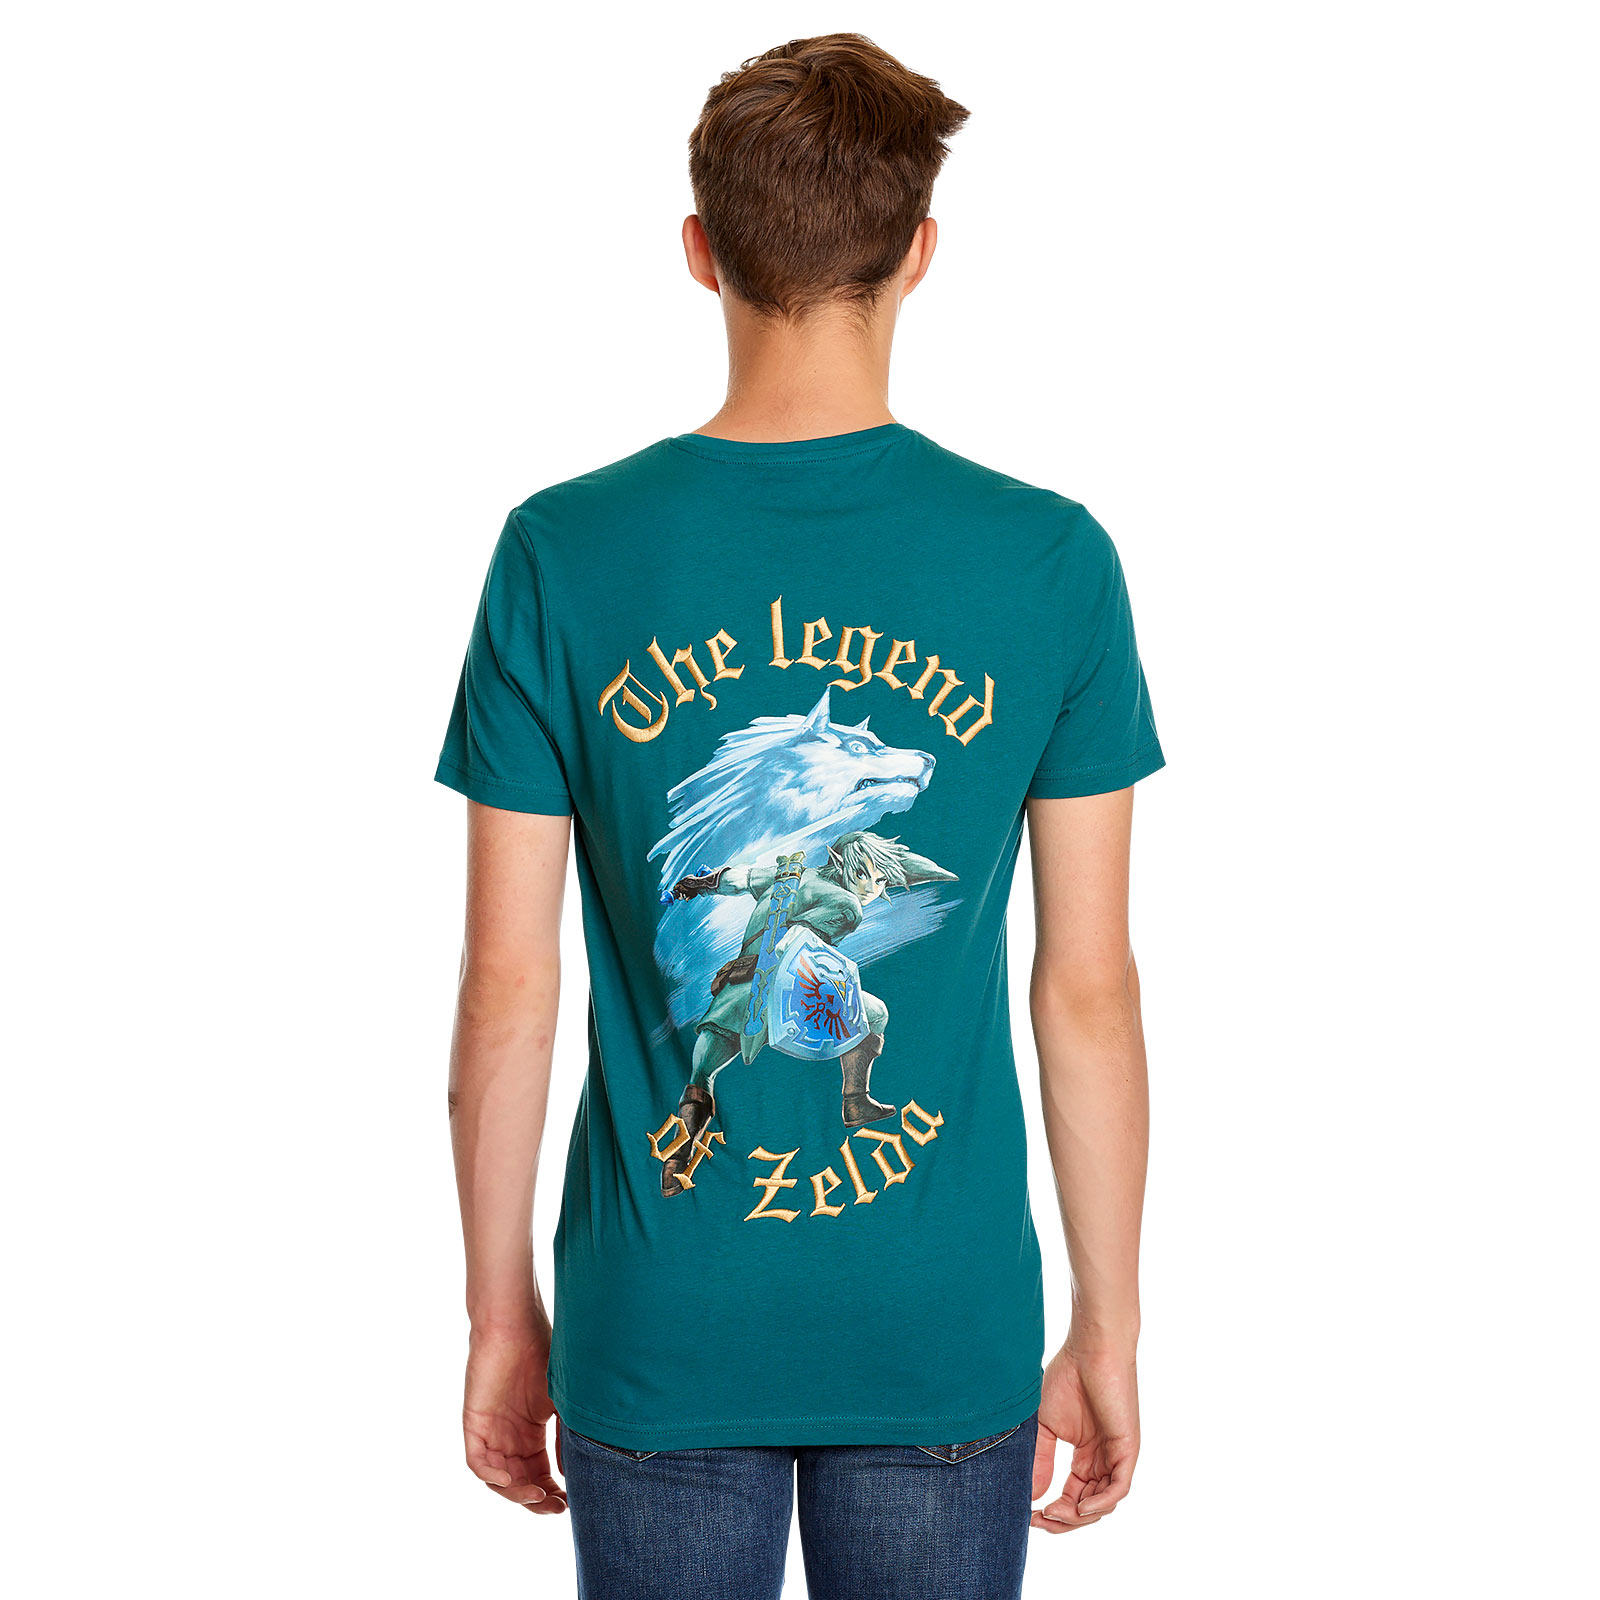 Zelda - Link with Wolf-Link T-Shirt turquoise